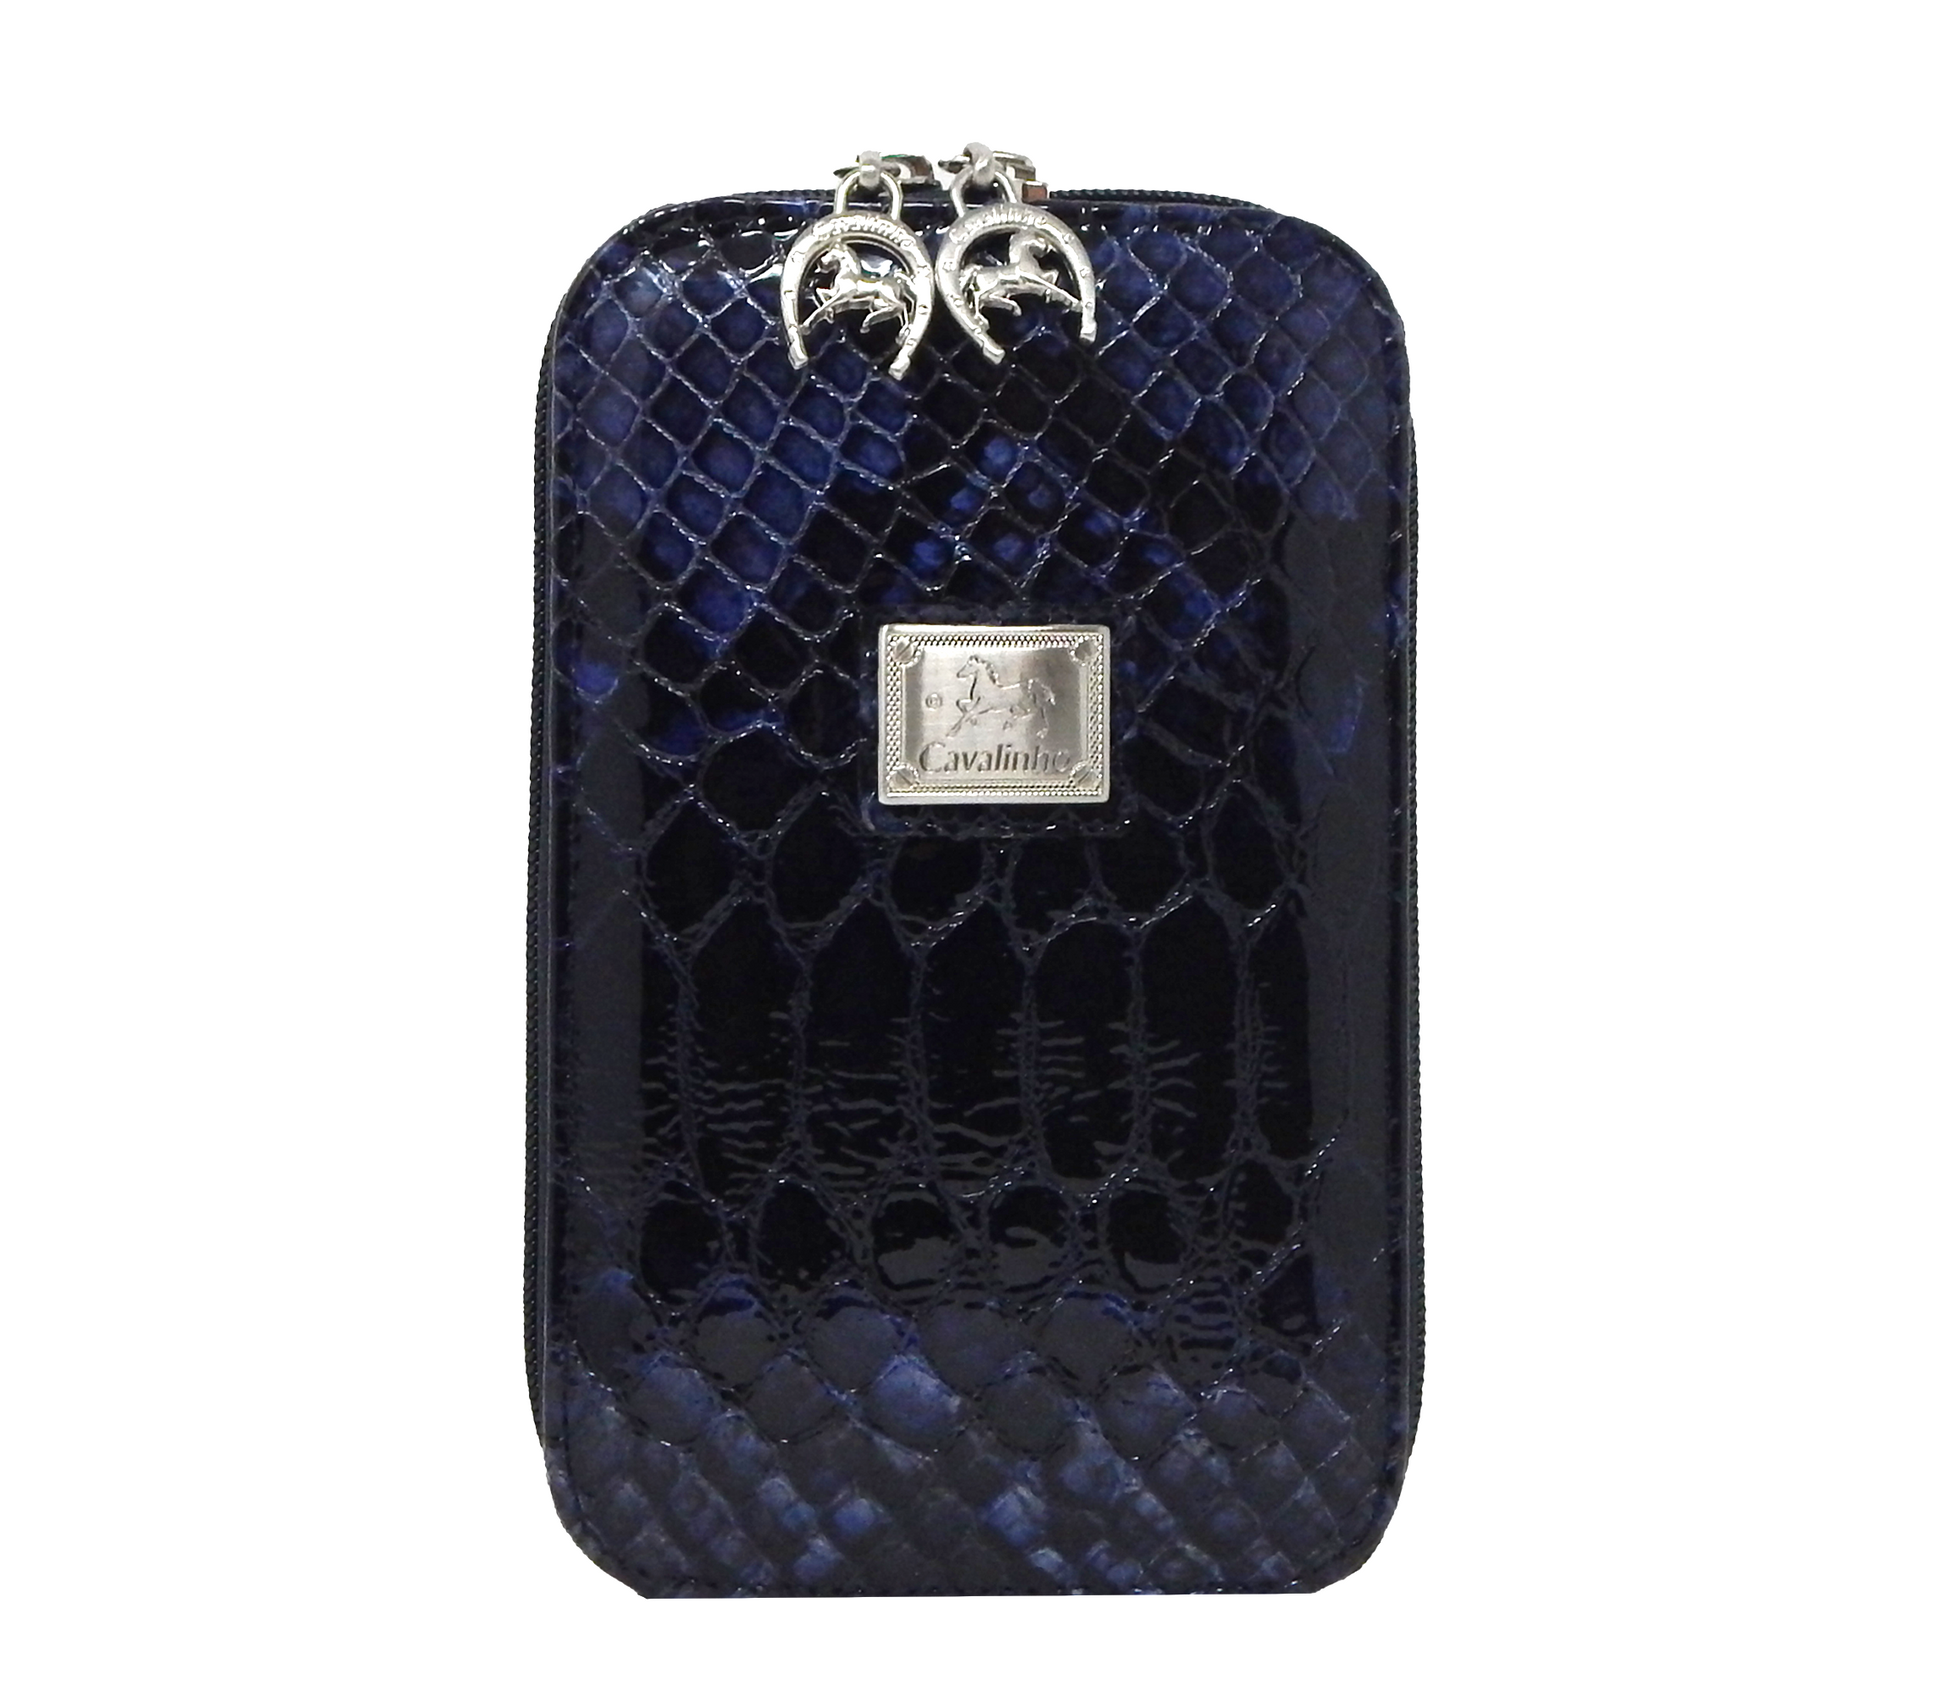 #color_ Navy | Cavalinho Gallop Patent Leather Phone Purse - Navy - 28170278.03_1